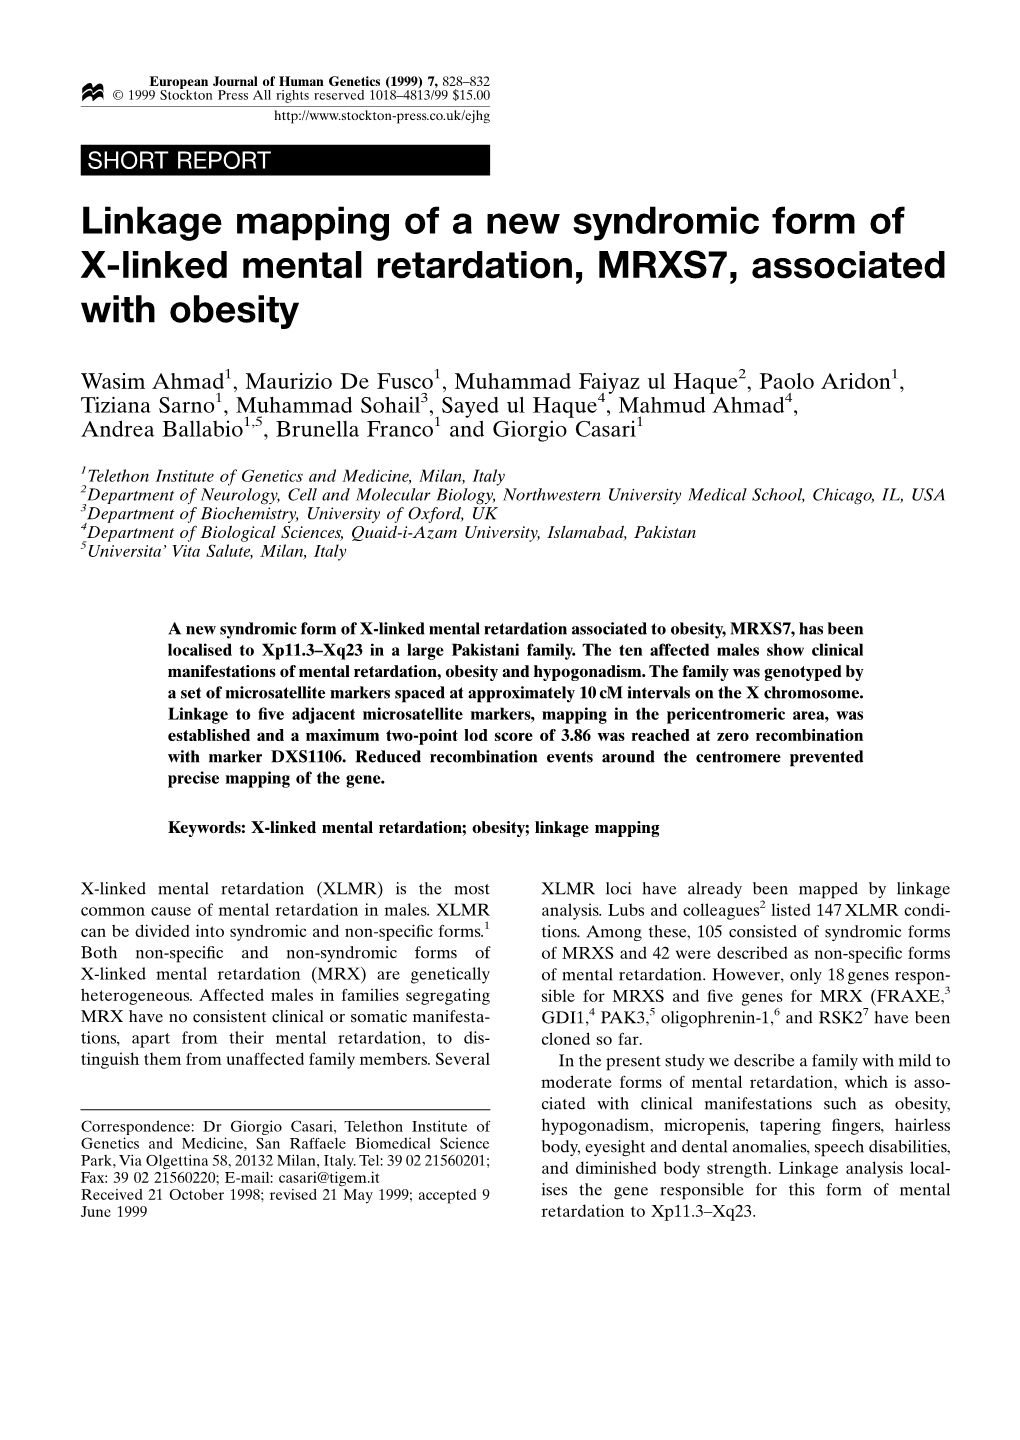 Linkage Mapping of a New Syndromic Form of X-Linked Mental Retardation, MRXS7, Associated with Obesity